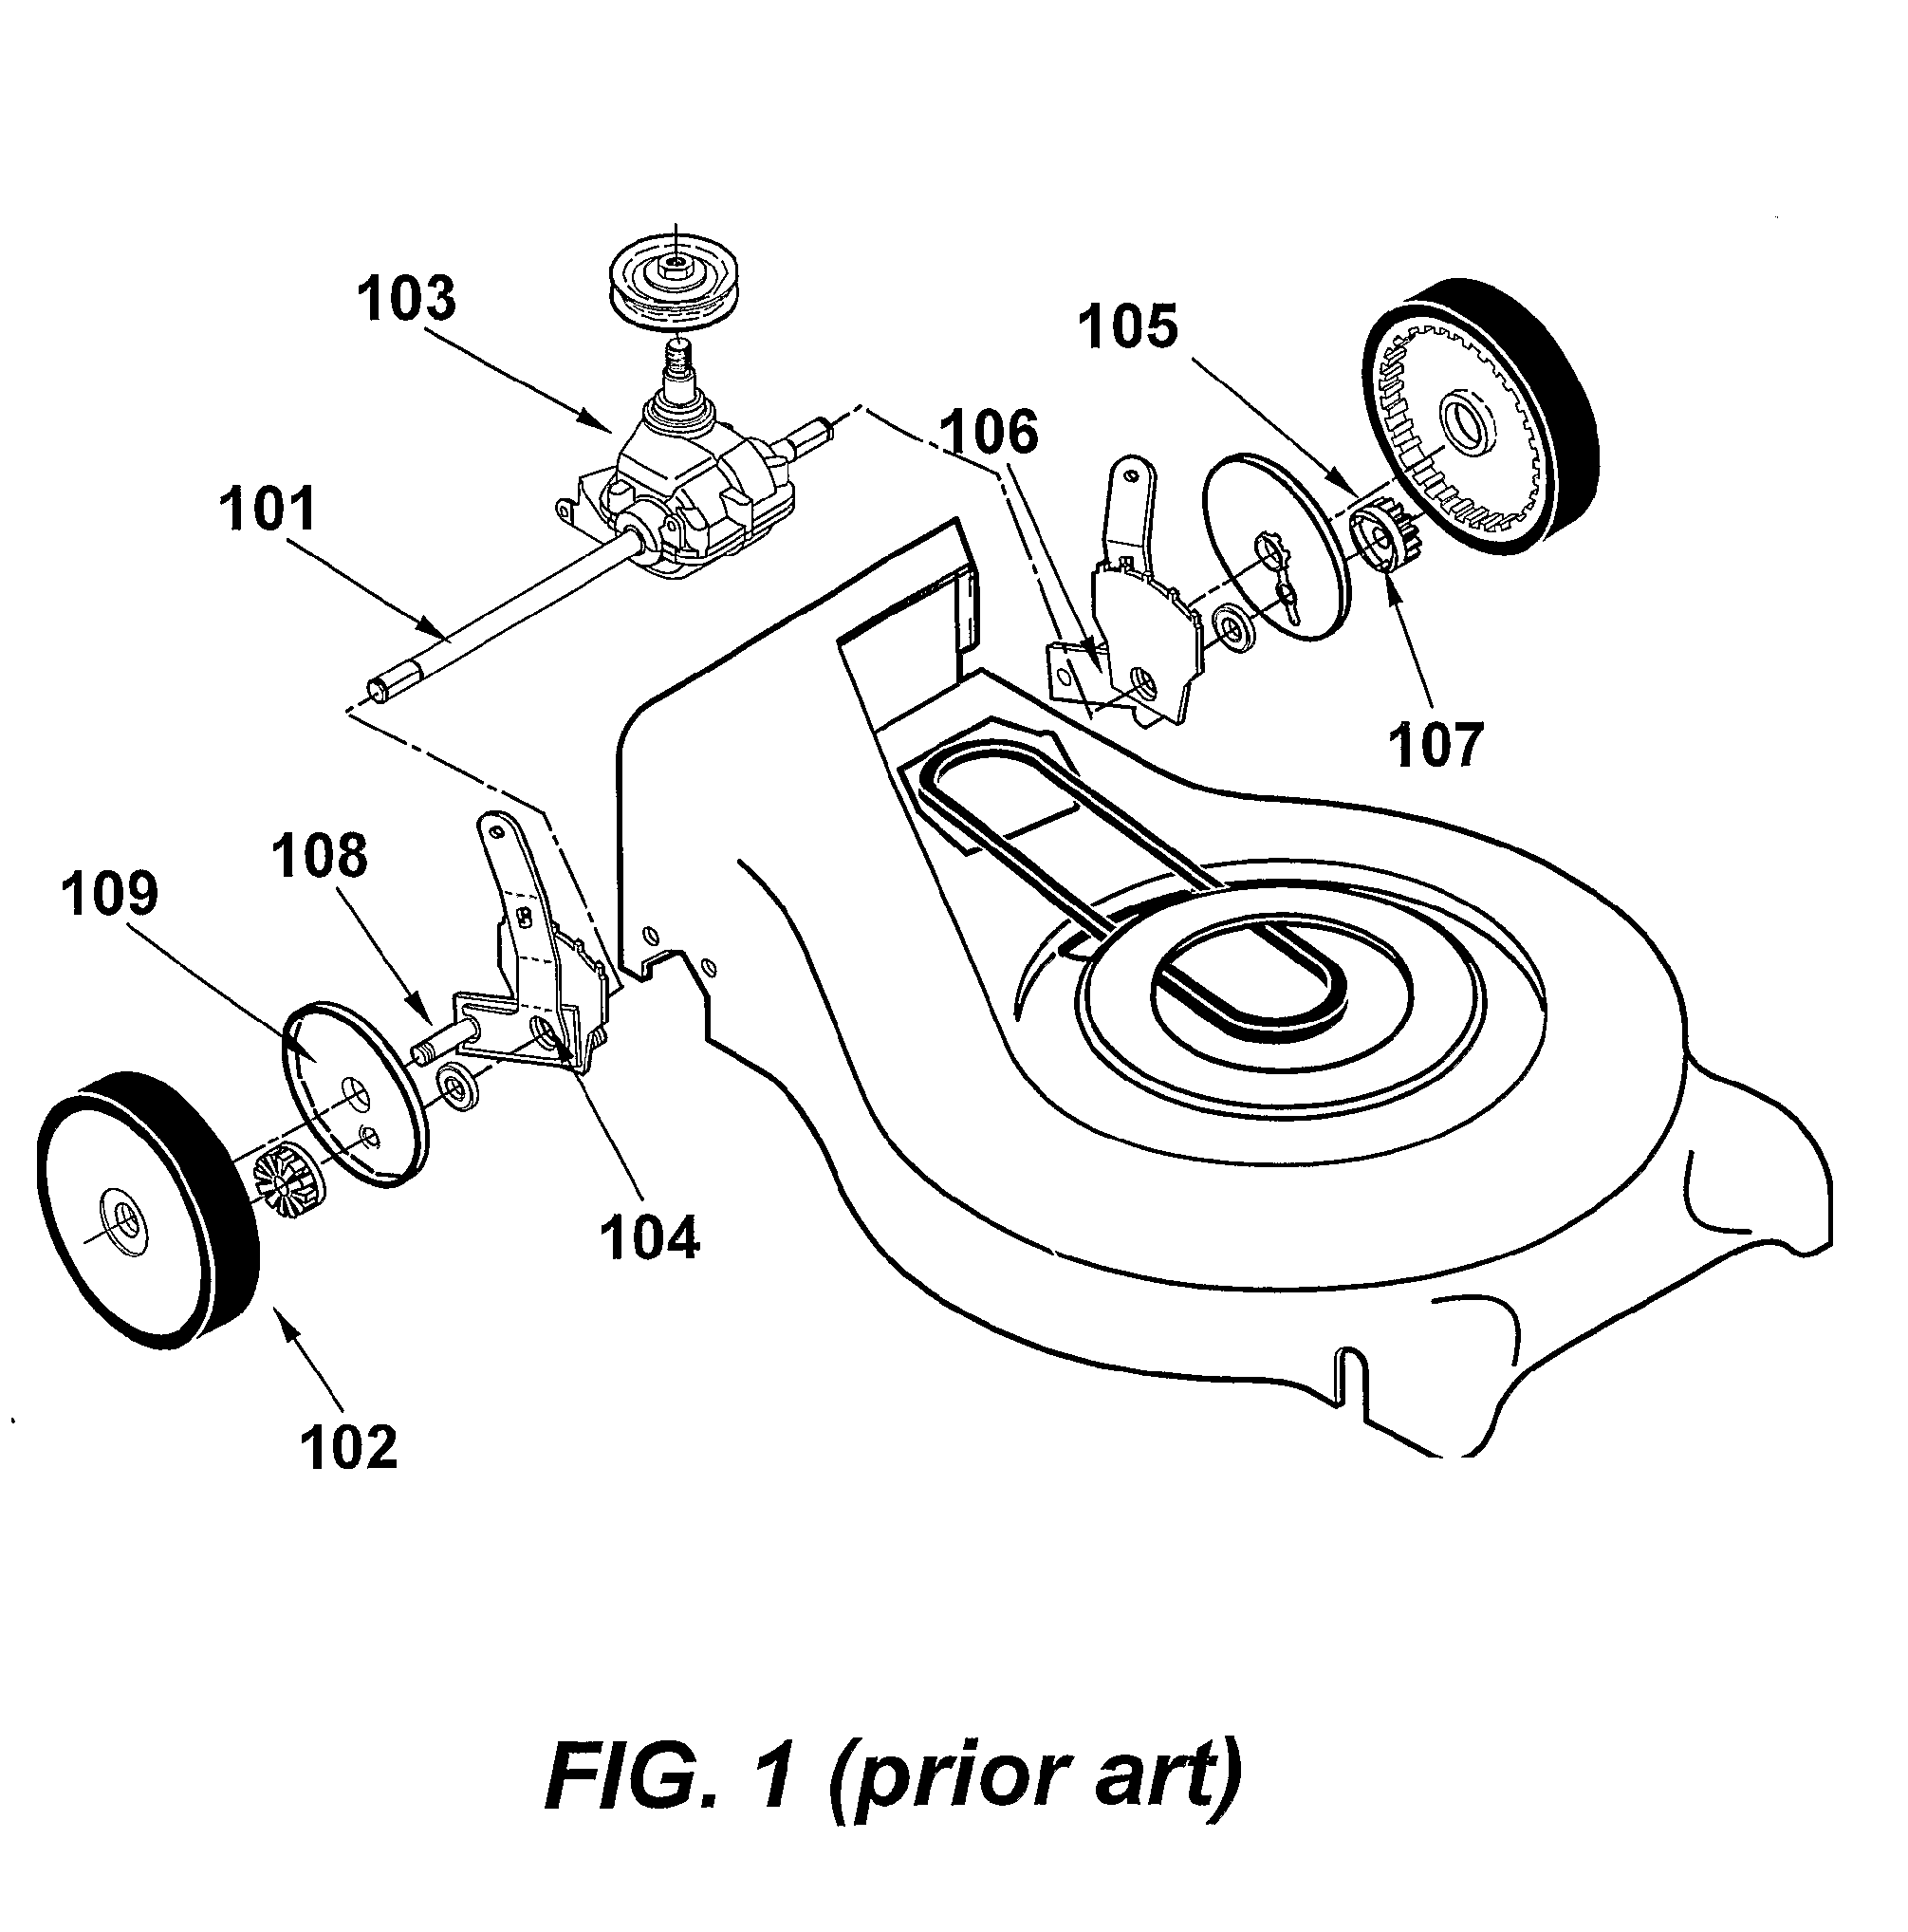 Power Transmission for a Lawn Mower and a Lawn Mower Provided with Such a Transmission